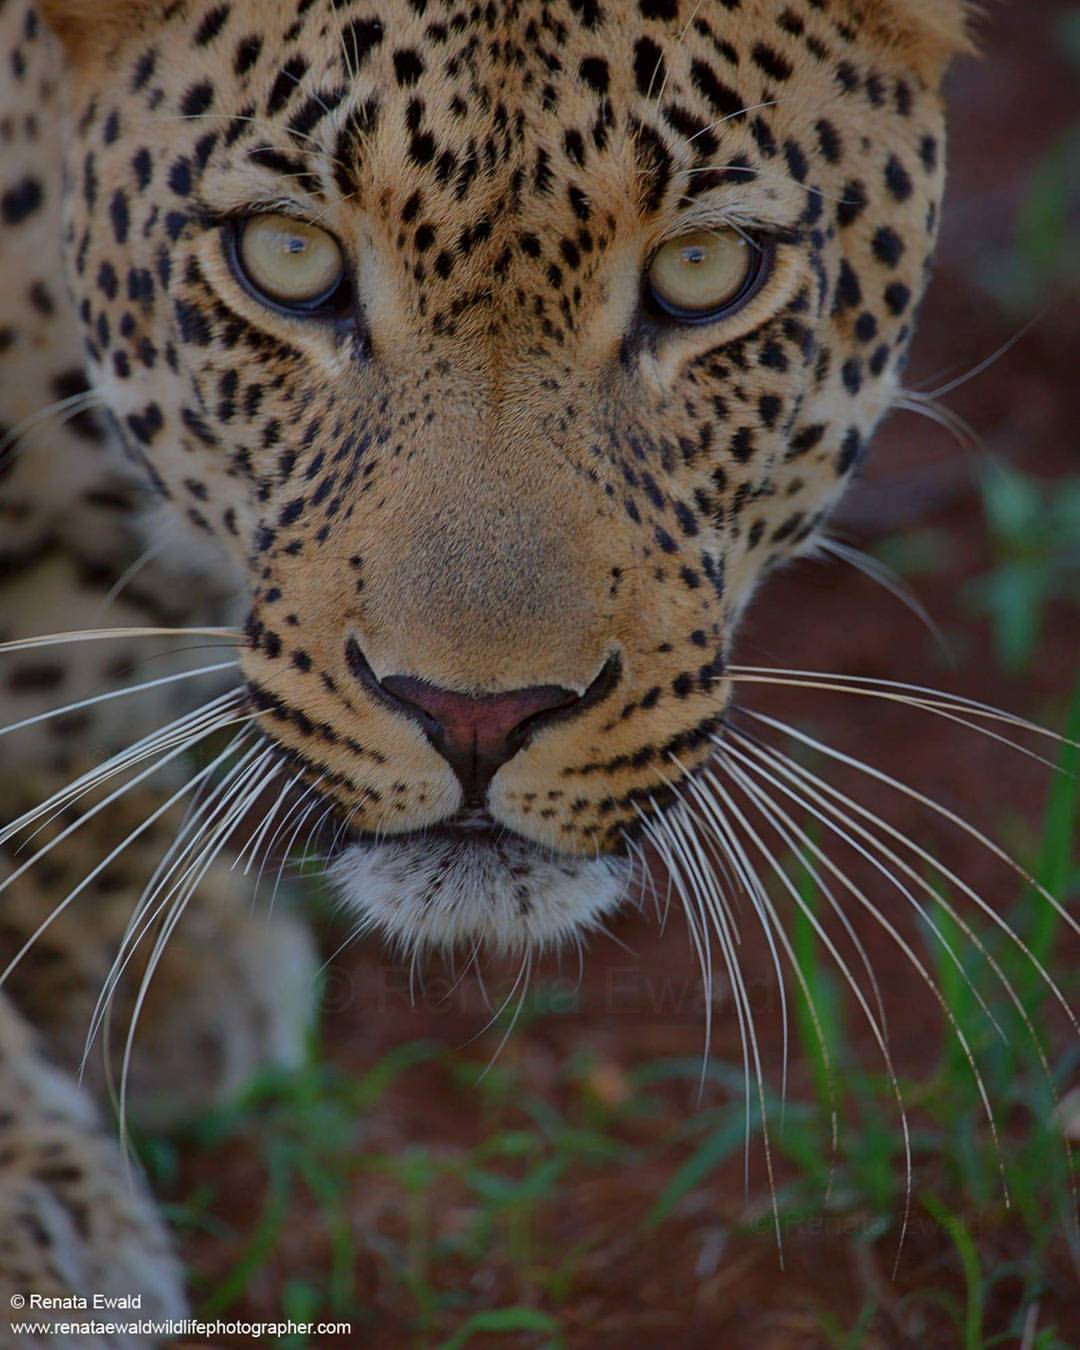 funnywildlife:
“Stunning close up of a leopard taken at Kruger National Park in South Africa
by #wildographydudette @renataewaldwildlifephotography
Check out her website for prints and other photographic services including tailor-made exclusive...